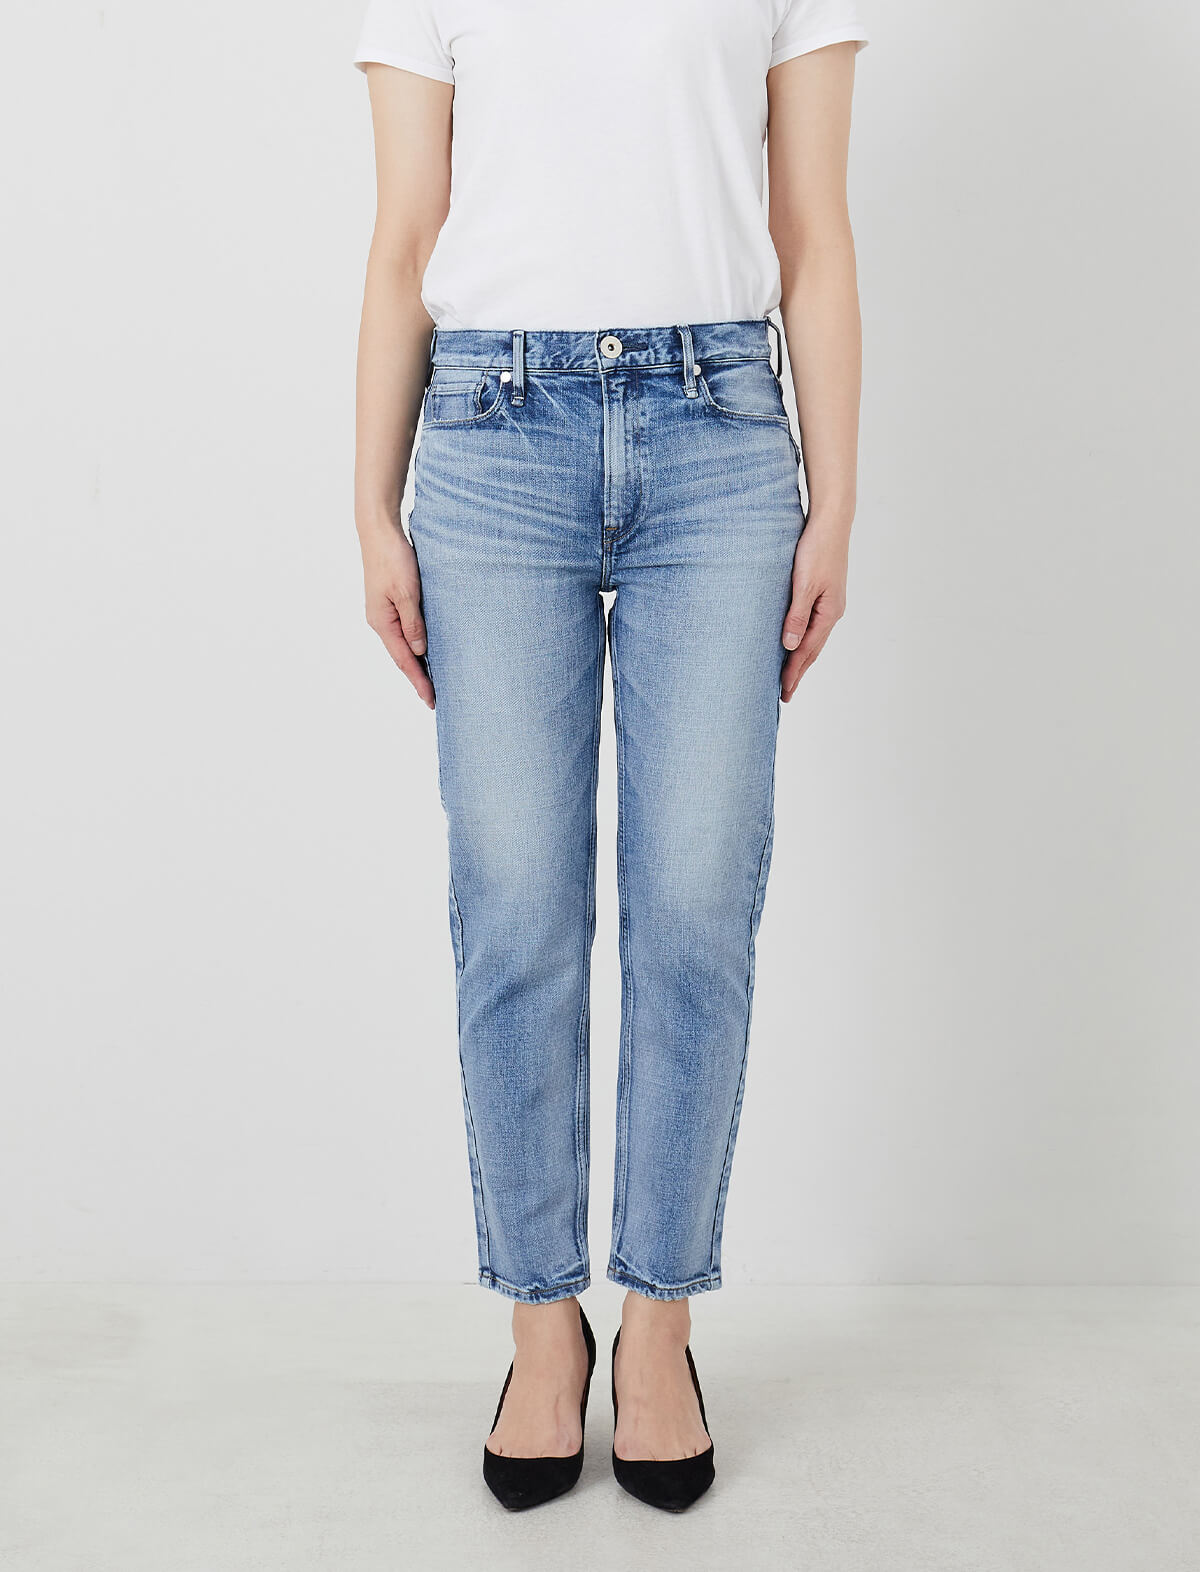 UPPER HIGHTS The Lady Midrise Slim Tapered Jeans in Sun